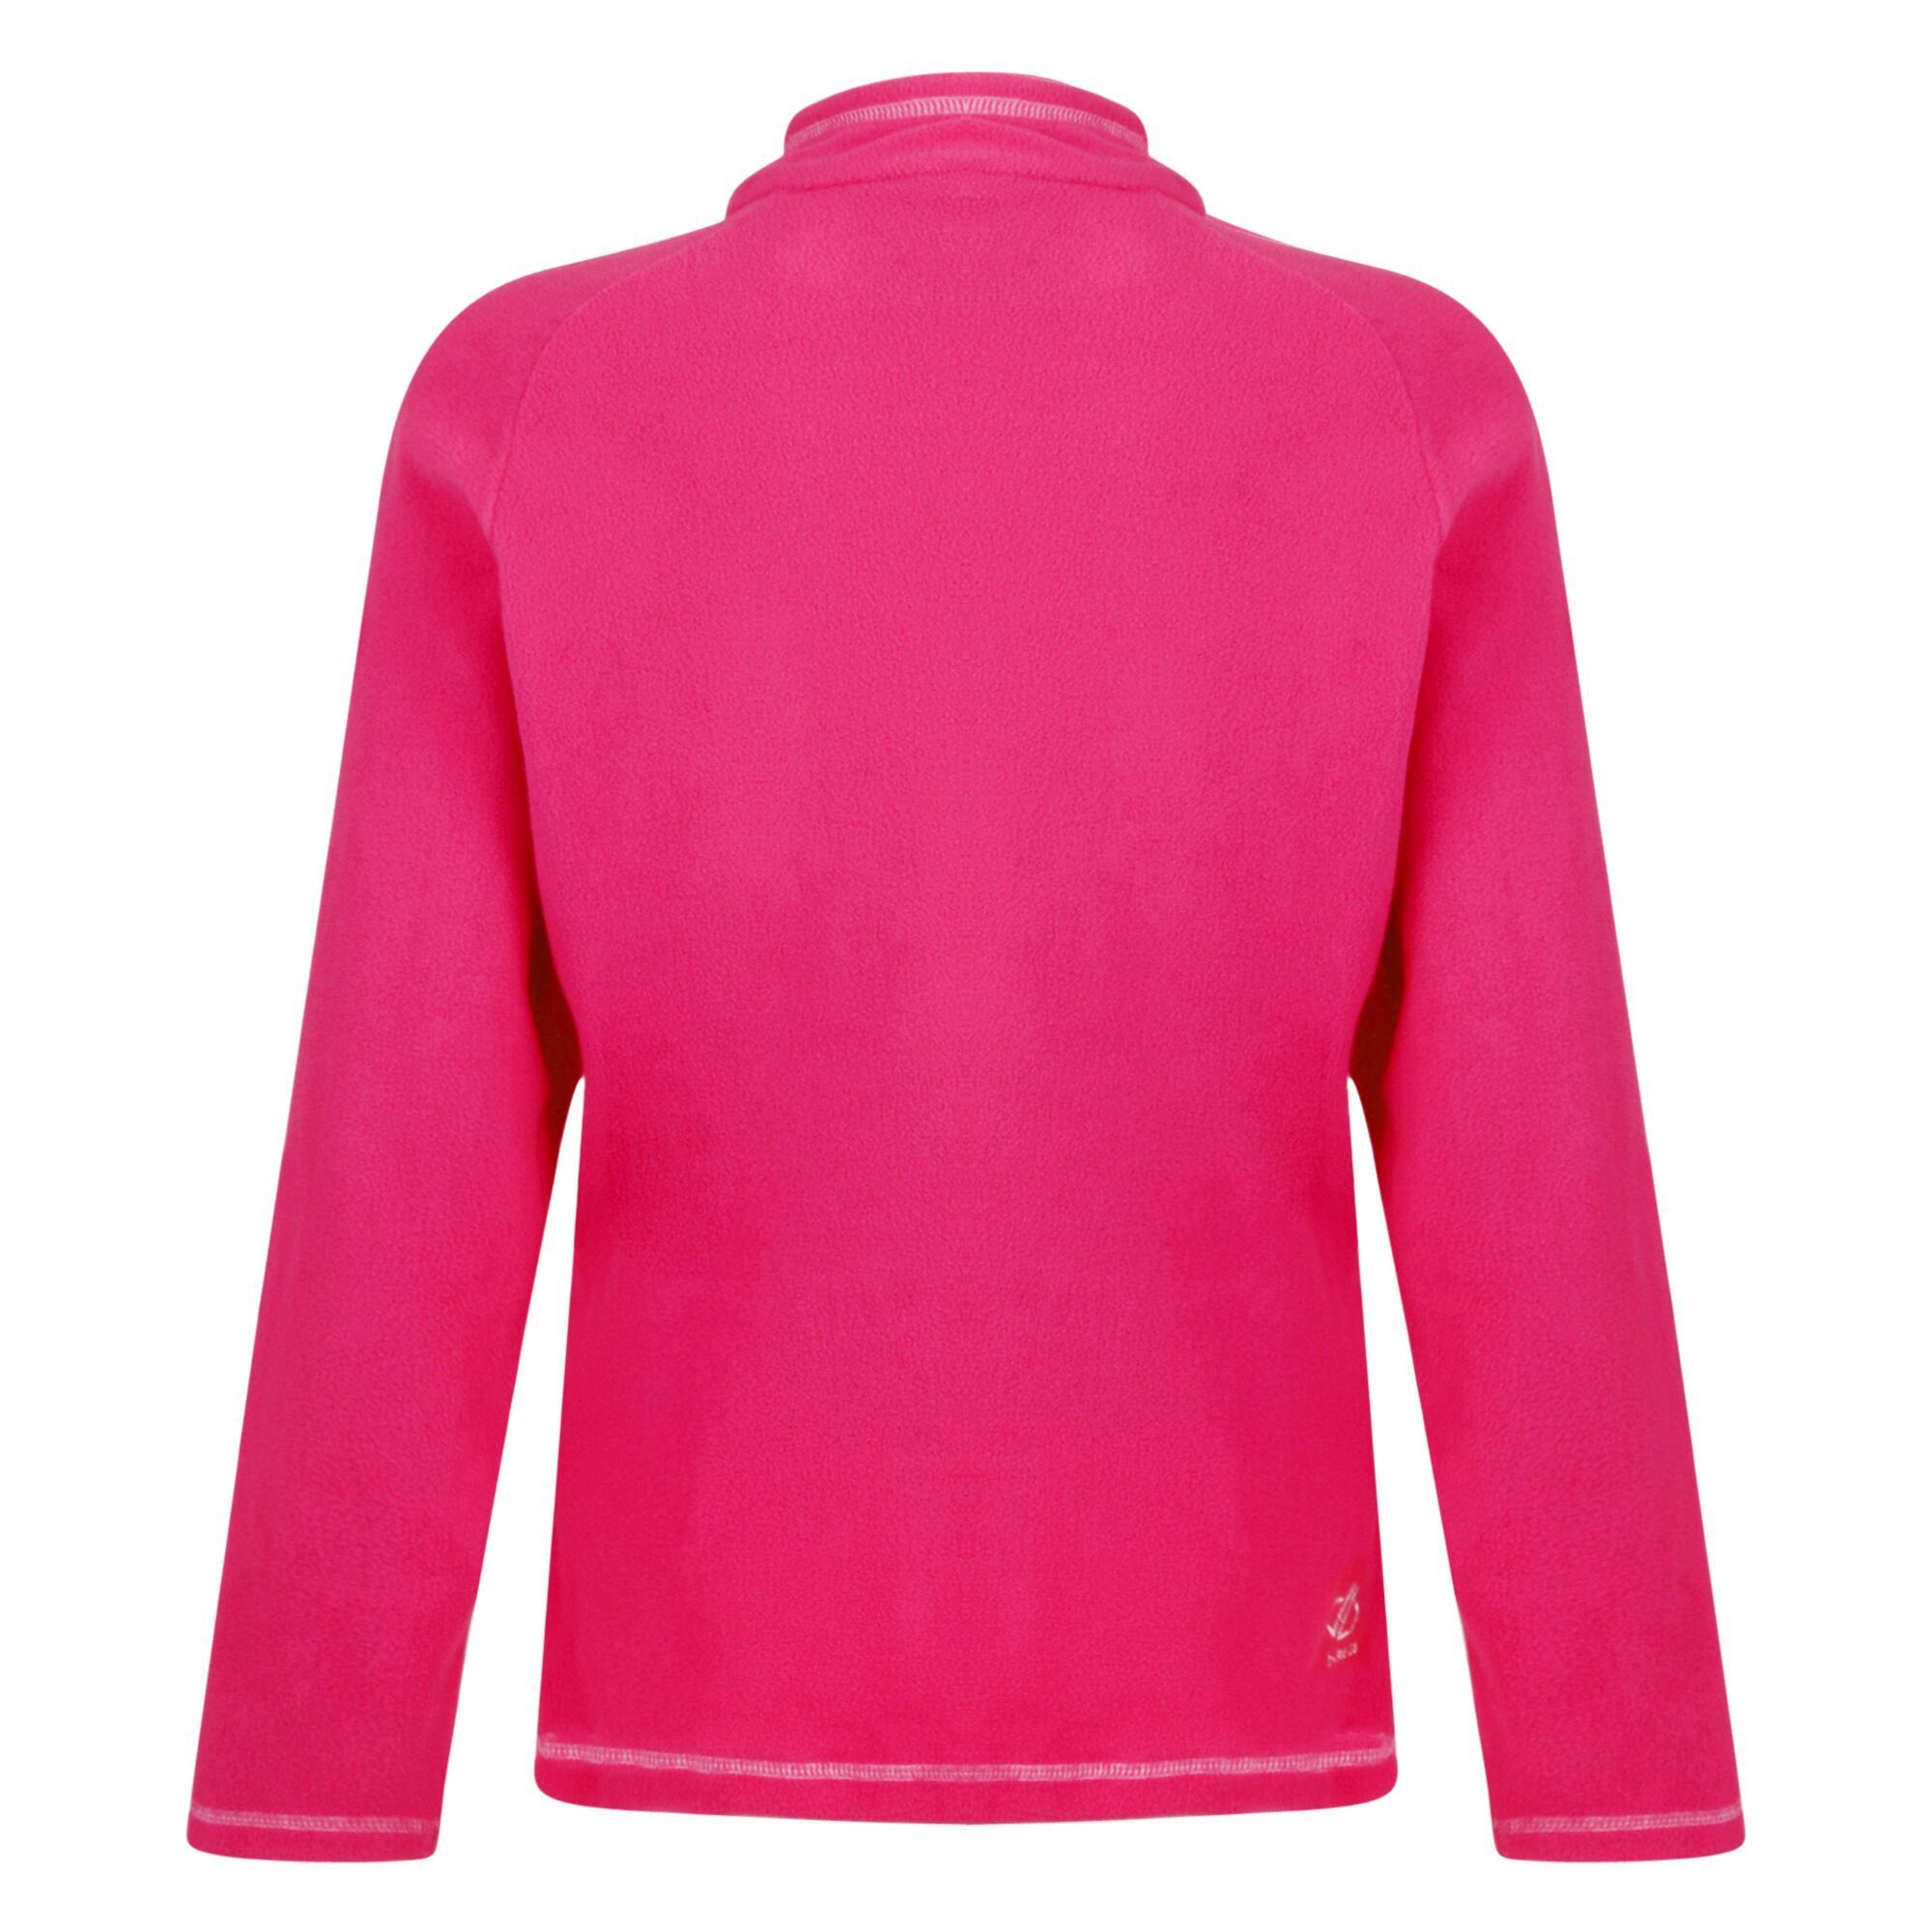 100% polyester fleece. 1 side brushed, 1 side anti pill 170gsm. Half length zip with inner zip and chin guard.